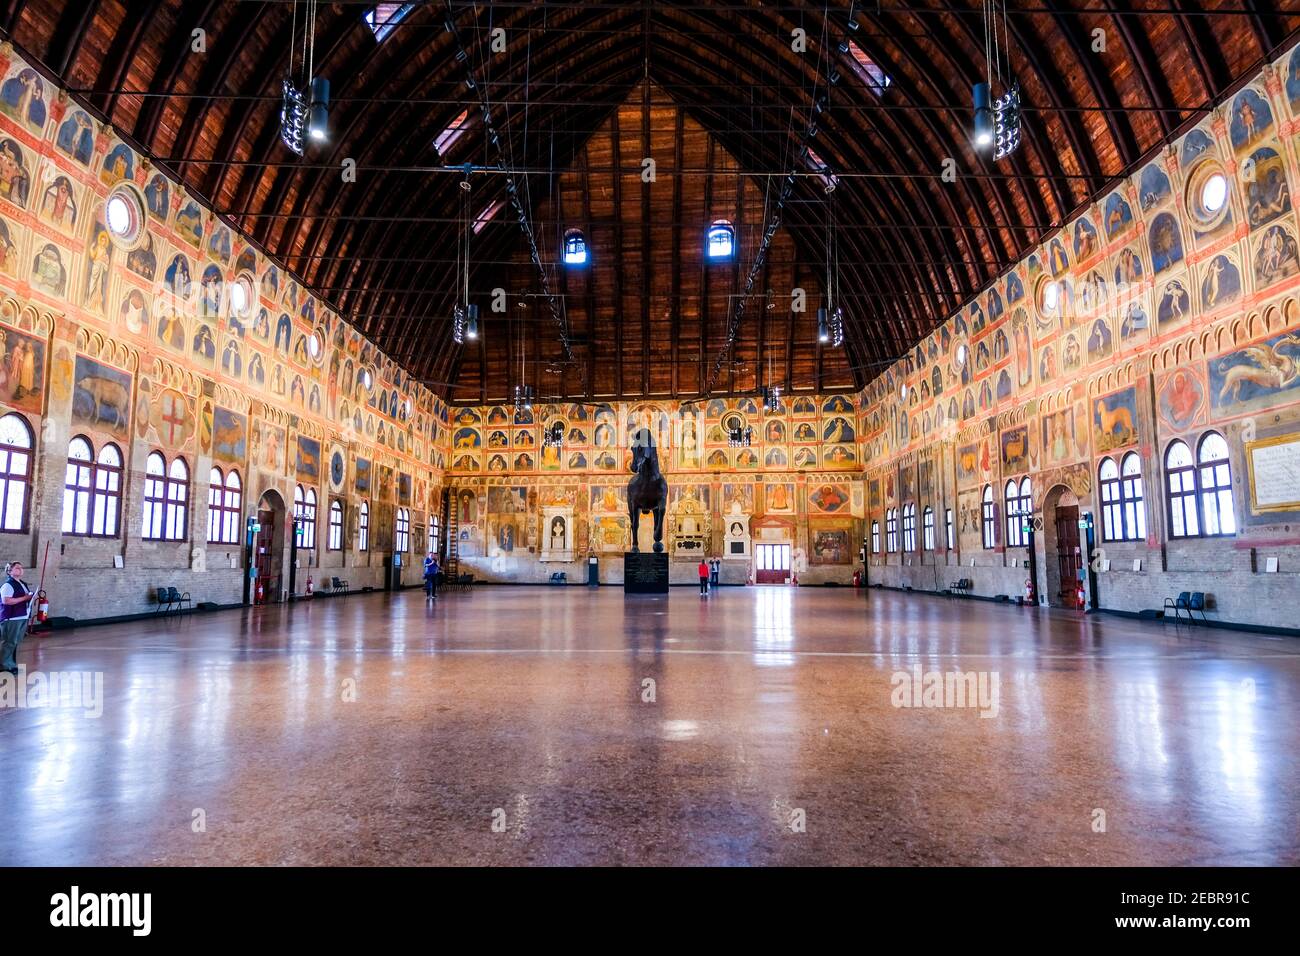 The Great Hall of Palazzo della Ragione with its vaulted ceiling and astrological inspired frescoes in Padua Italy Stock Photo